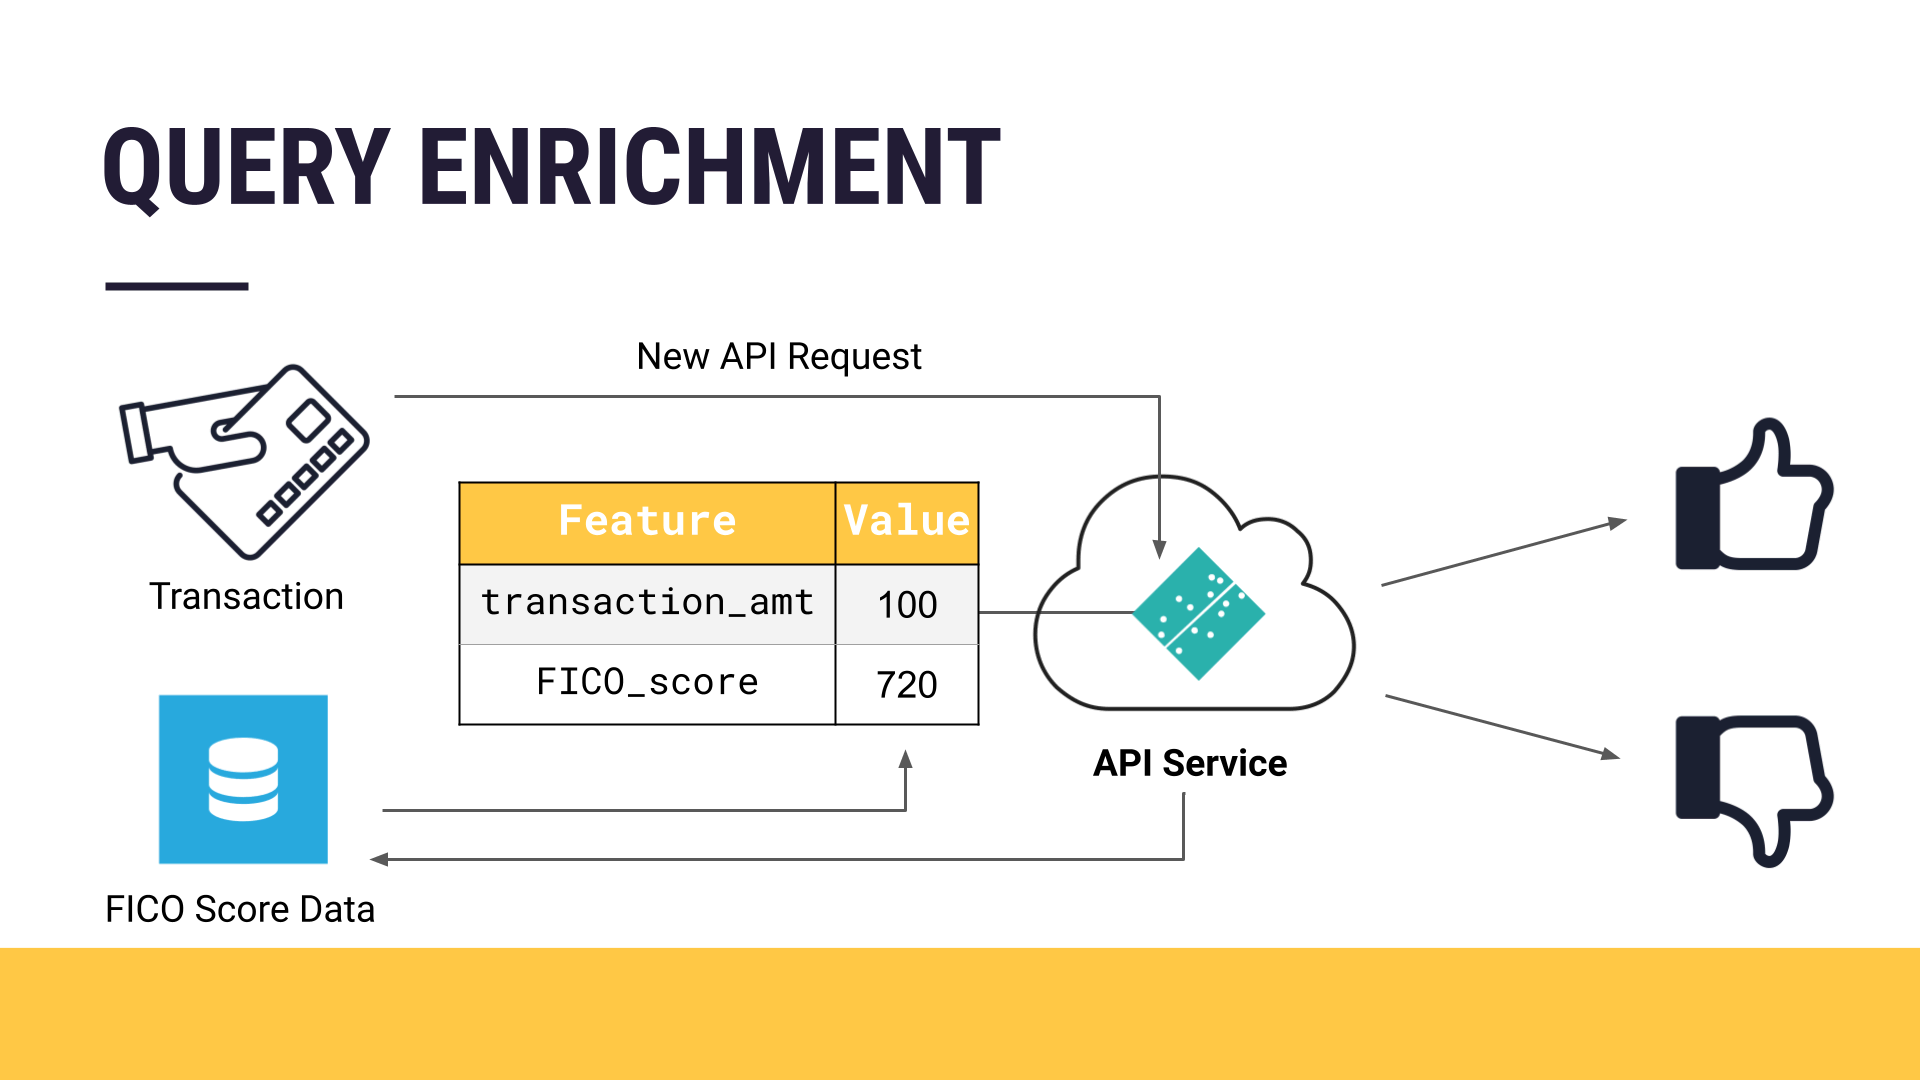 Slide depicting an API query enrichment for a credit card fraud example.